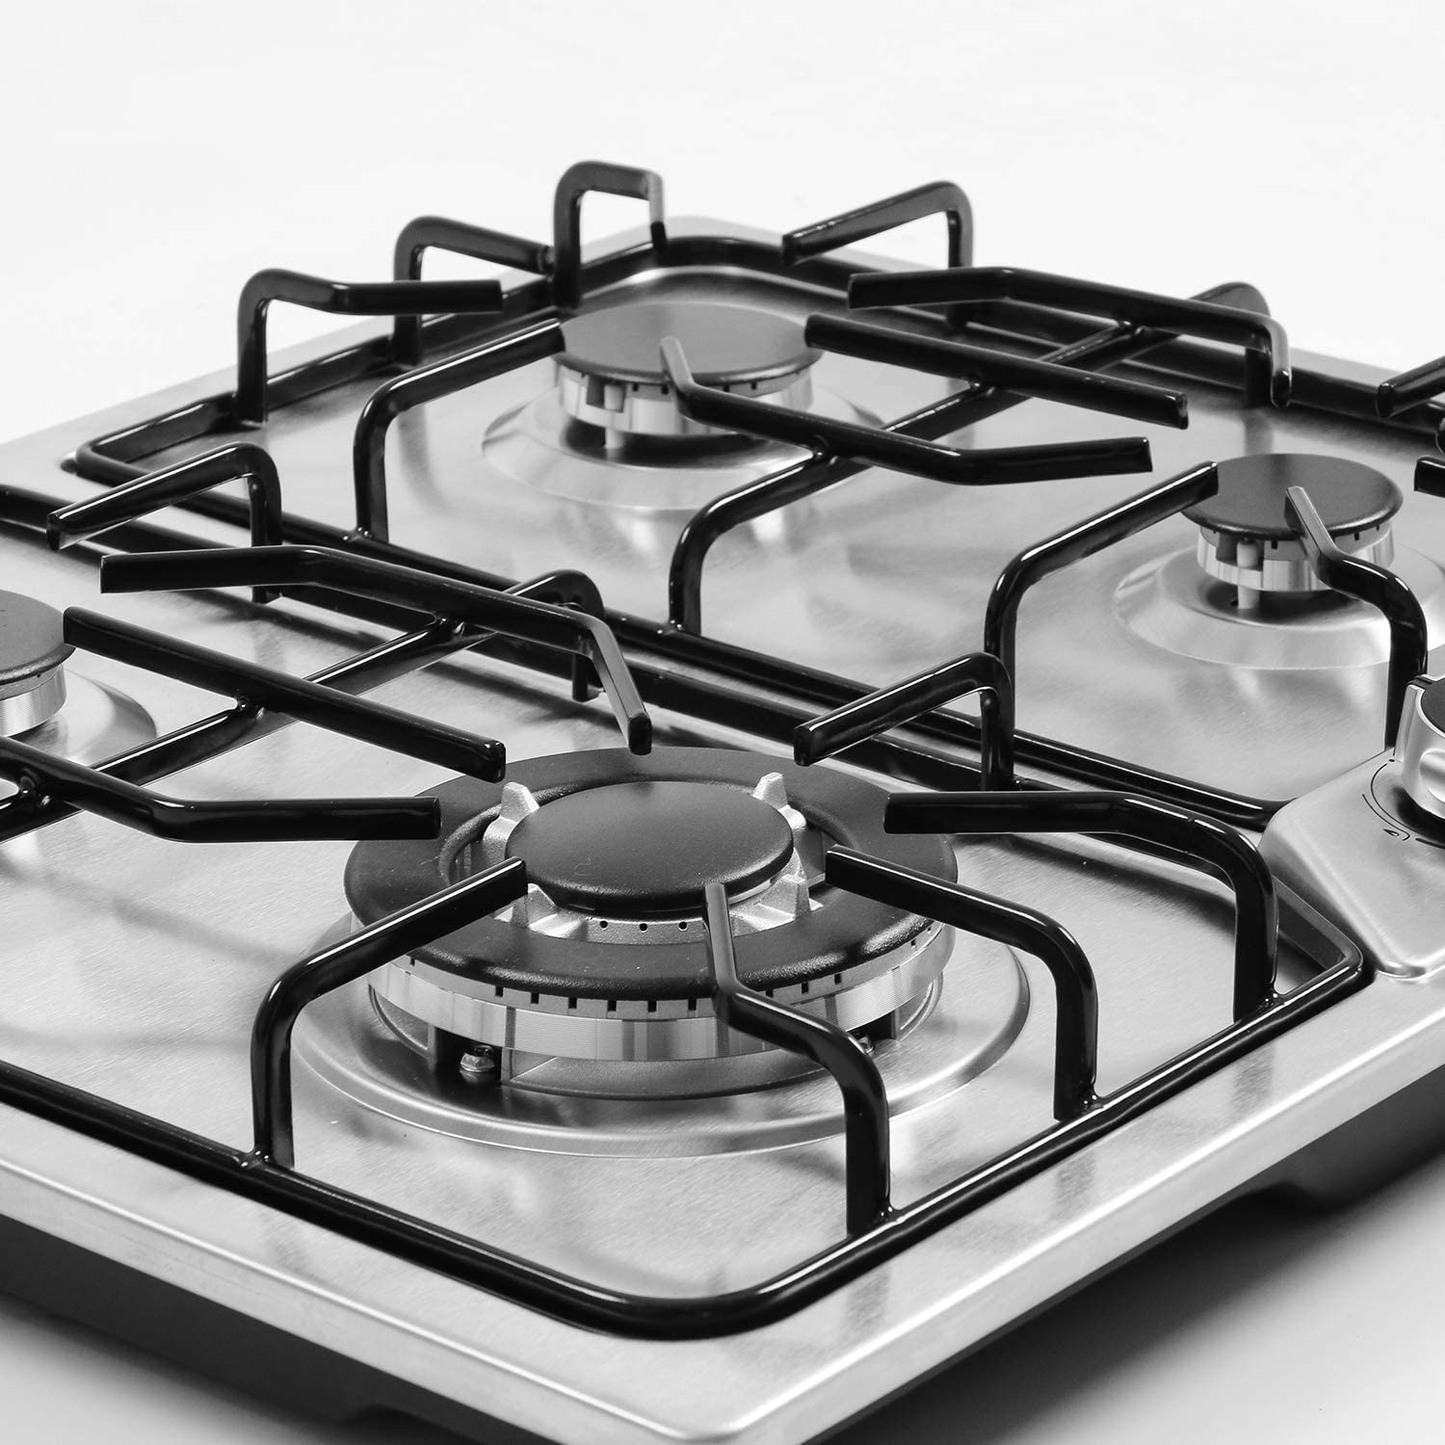 22″x20″ Built in Gas Cooktop 4 Burners Stainless Steel Stove with NG/LPG Conversion Kit Thermocouple Protection and Easy to Clean (20Wx22L)